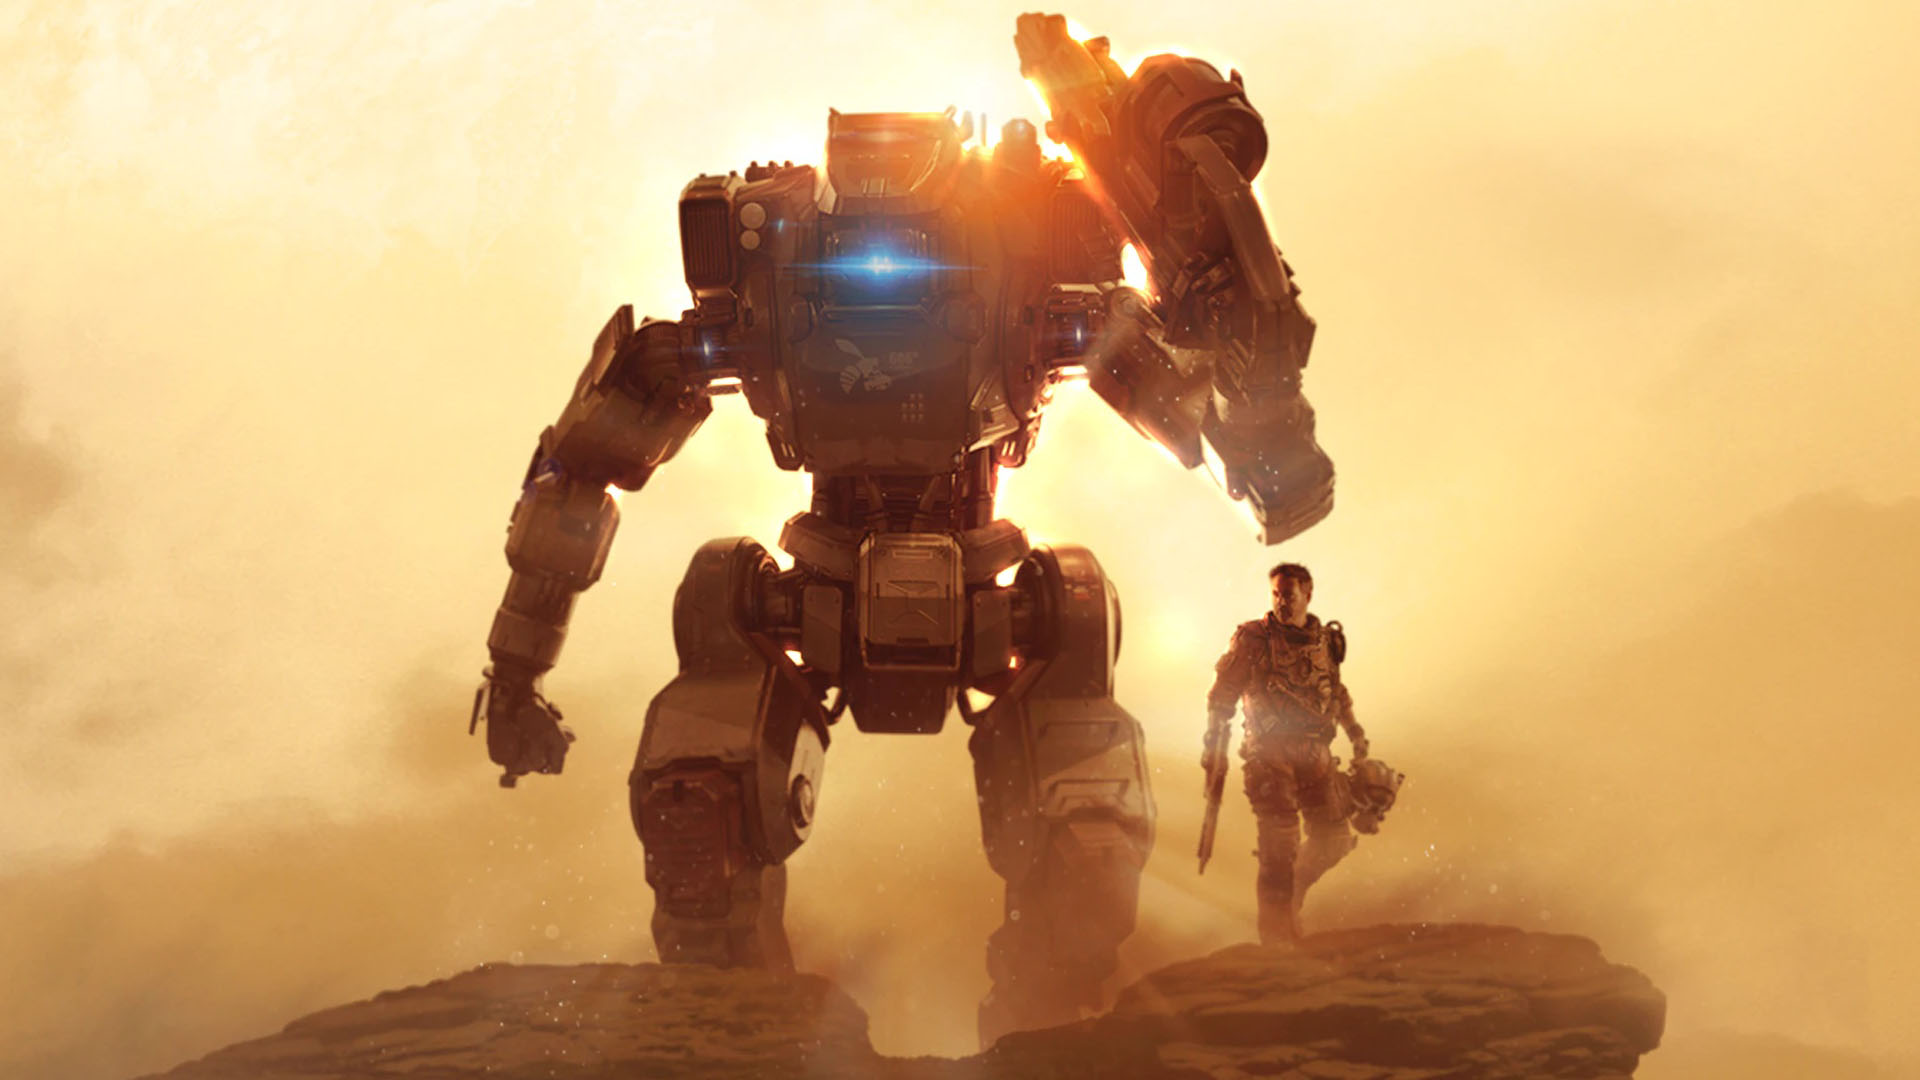 Respawn Entertainment is Working on a New Single Player Game